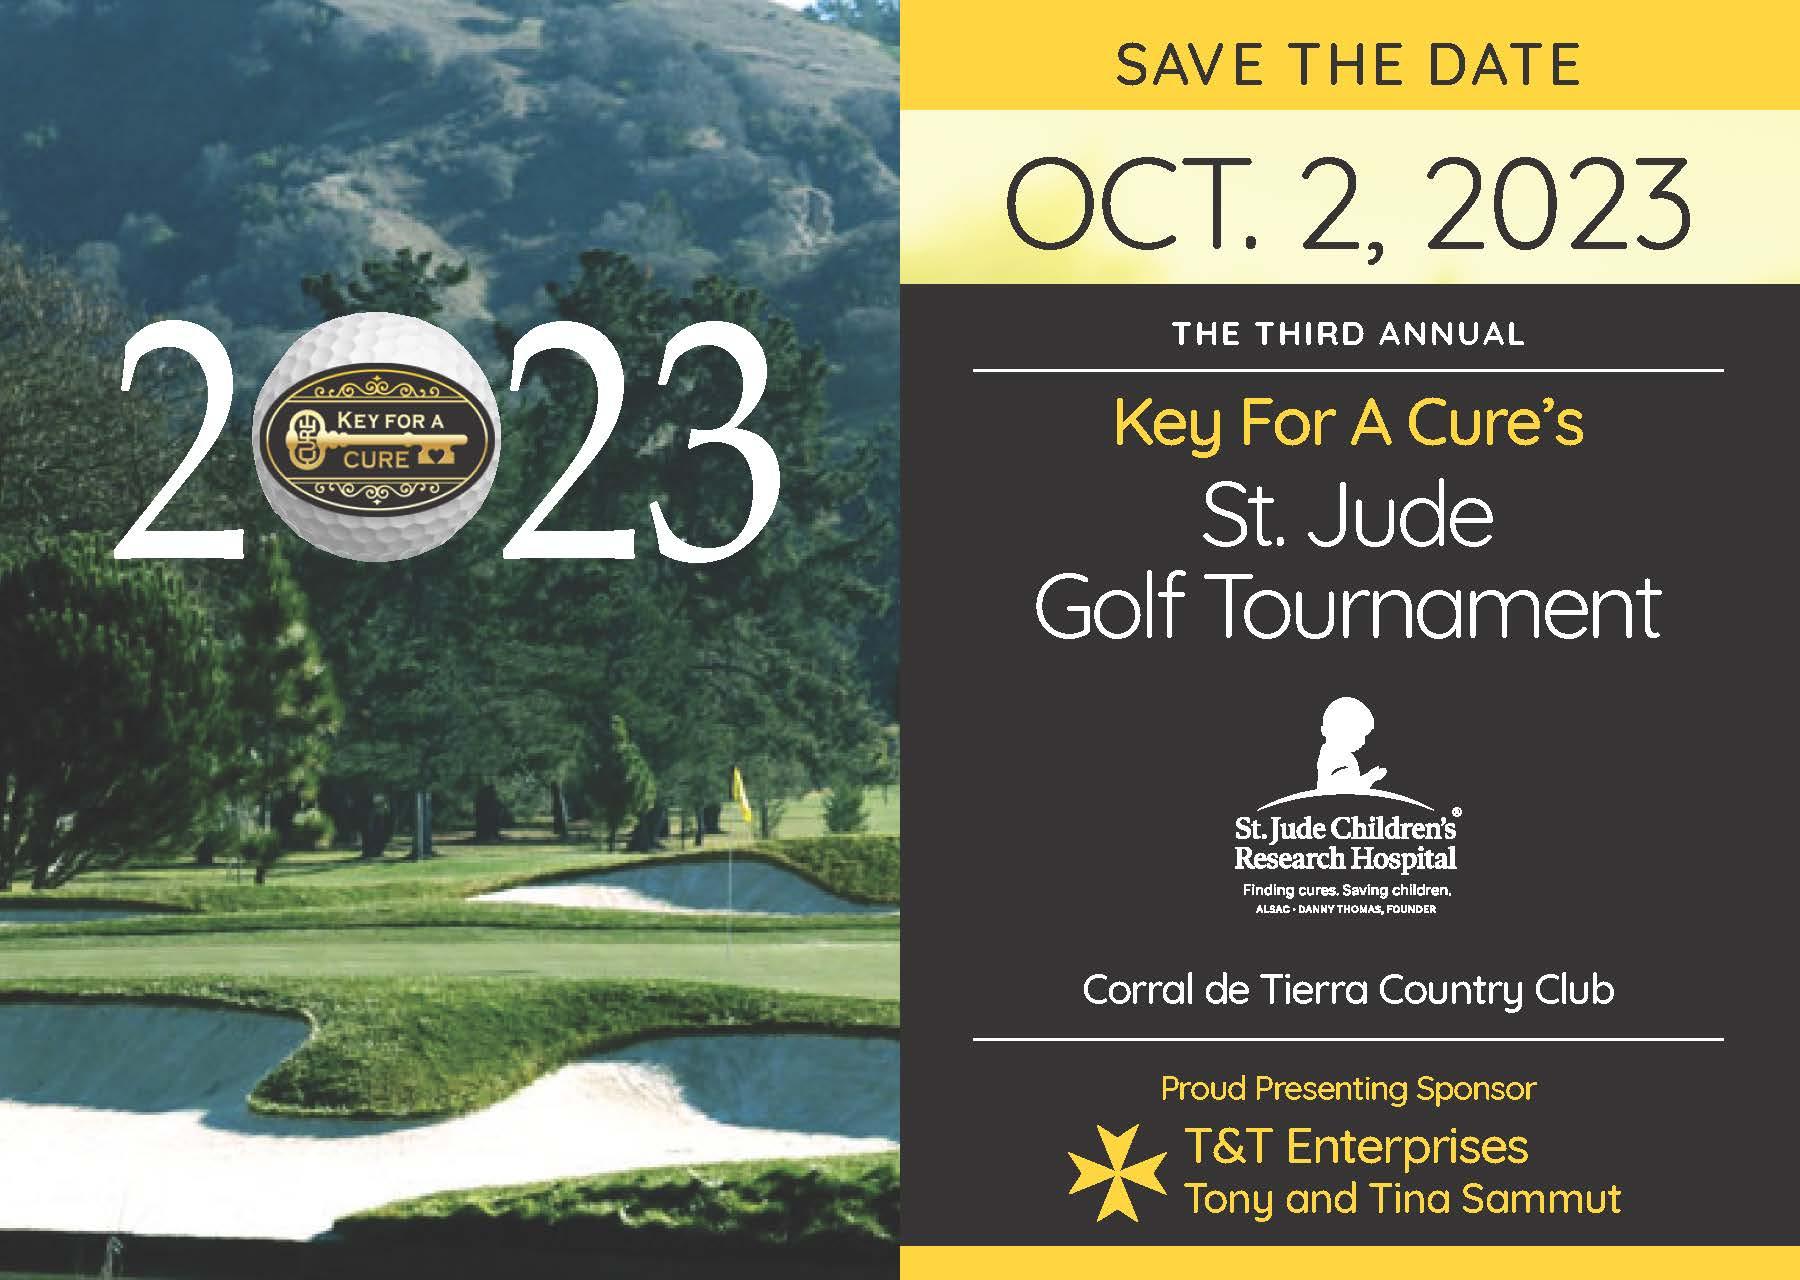 Key For a Cure Foundation St. Jude Children's Hospital Golf Tournament